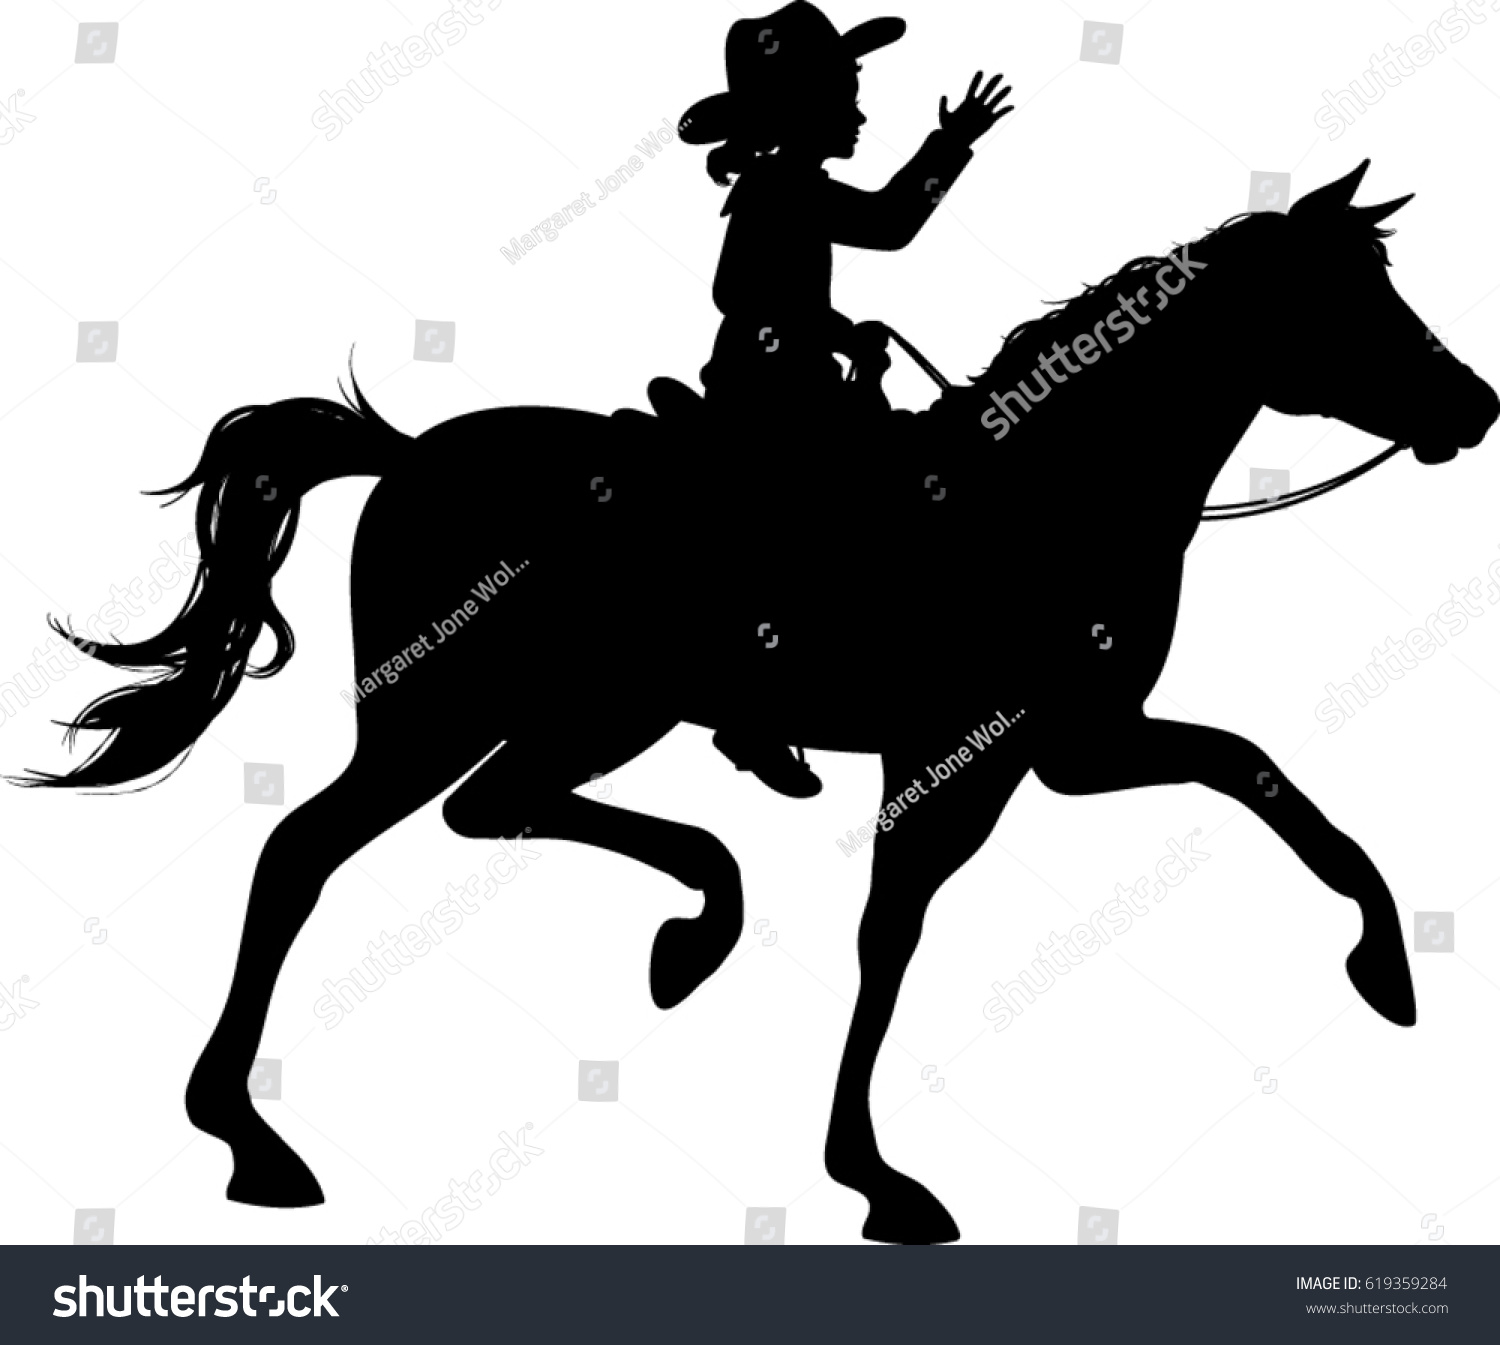 Download Cow Girl Riding Horse Silhouette Vector Stock Vector 619359284 - Shutterstock